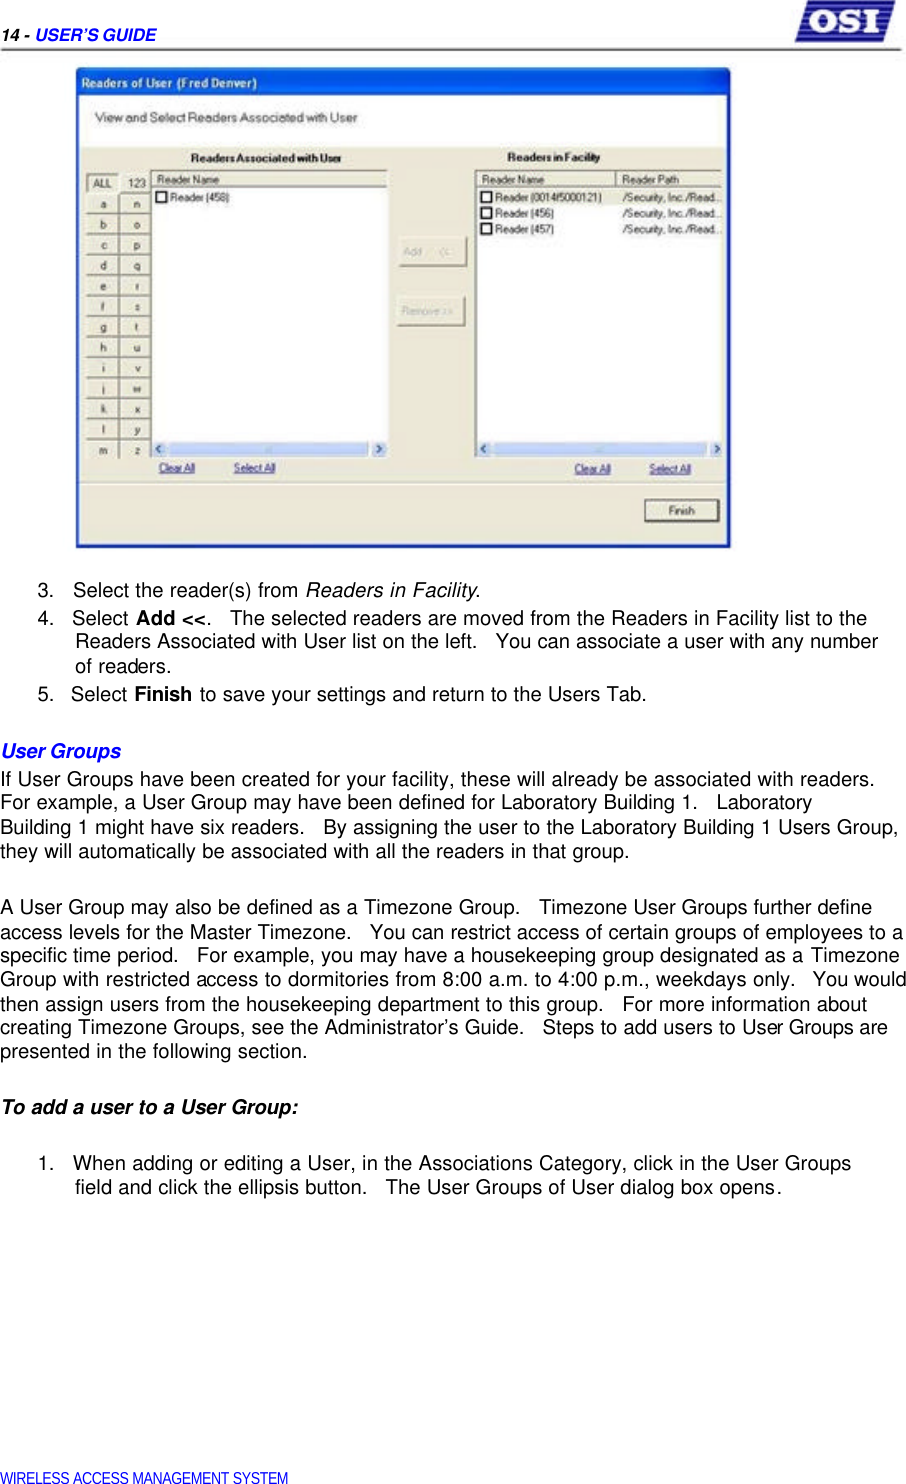     14 - USER’S GUIDE                        3.   Select the reader(s) from Readers in Facility.  4.   Select Add &lt;&lt;.   The selected readers are moved from the Readers in Facility list to the   Readers Associated with User list on the left.   You can associate a user with any number   of readers.  5.   Select Finish to save your settings and return to the Users Tab.   User Groups  If User Groups have been created for your facility, these will already be associated with readers. For example, a User Group may have been defined for Laboratory Building 1.   Laboratory  Building 1 might have six readers.   By assigning the user to the Laboratory Building 1 Users Group, they will automatically be associated with all the readers in that group.   A User Group may also be defined as a Timezone Group.   Timezone User Groups further define access levels for the Master Timezone.   You can restrict access of certain groups of employees to a specific time period.   For example, you may have a housekeeping group designated as a Timezone Group with restricted access to dormitories from 8:00 a.m. to 4:00 p.m., weekdays only.   You would then assign users from the housekeeping department to this group.   For more information about creating Timezone Groups, see the Administrator’s Guide.   Steps to add users to User Groups are presented in the following section.   To add a user to a User Group:   1.   When adding or editing a User, in the Associations Category, click in the User Groups   field and click the ellipsis button.   The User Groups of User dialog box opens.                WIRELESS ACCESS MANAGEMENT SYSTEM  